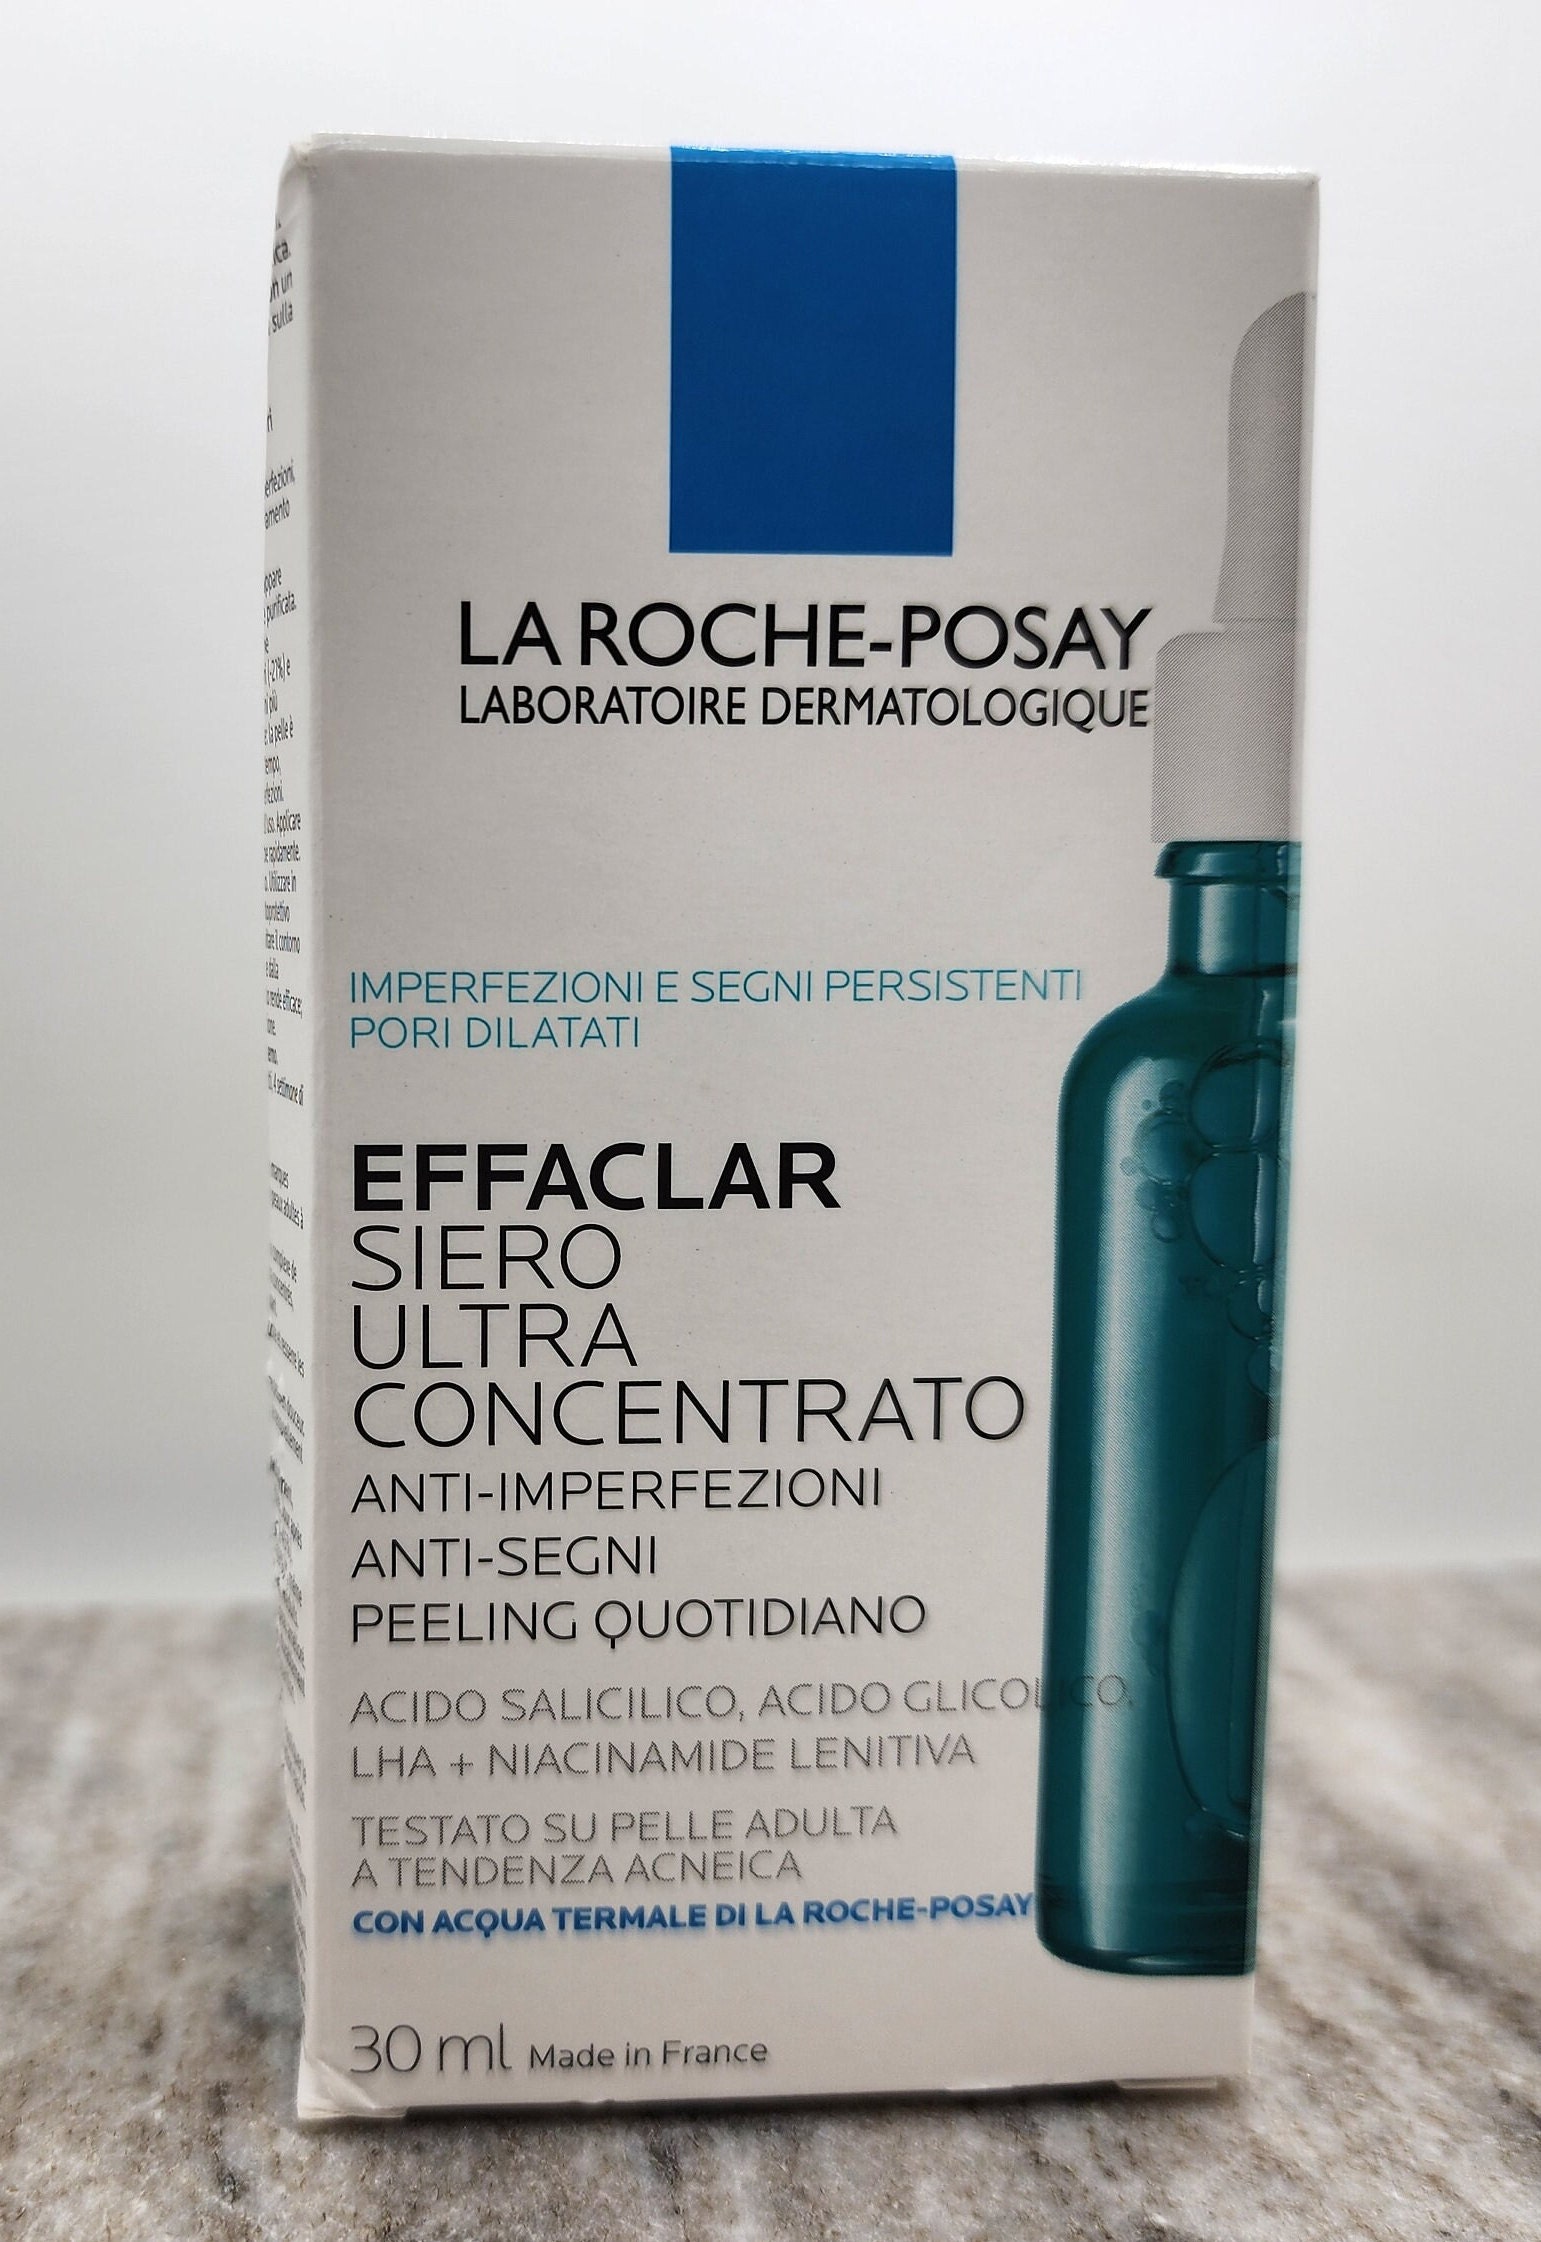 La Roche-posay Effaclar Ultra Concentrated Serum for Peeling W/ Acne Prone  and Signs of Aging 50ml or 30ml - Etsy